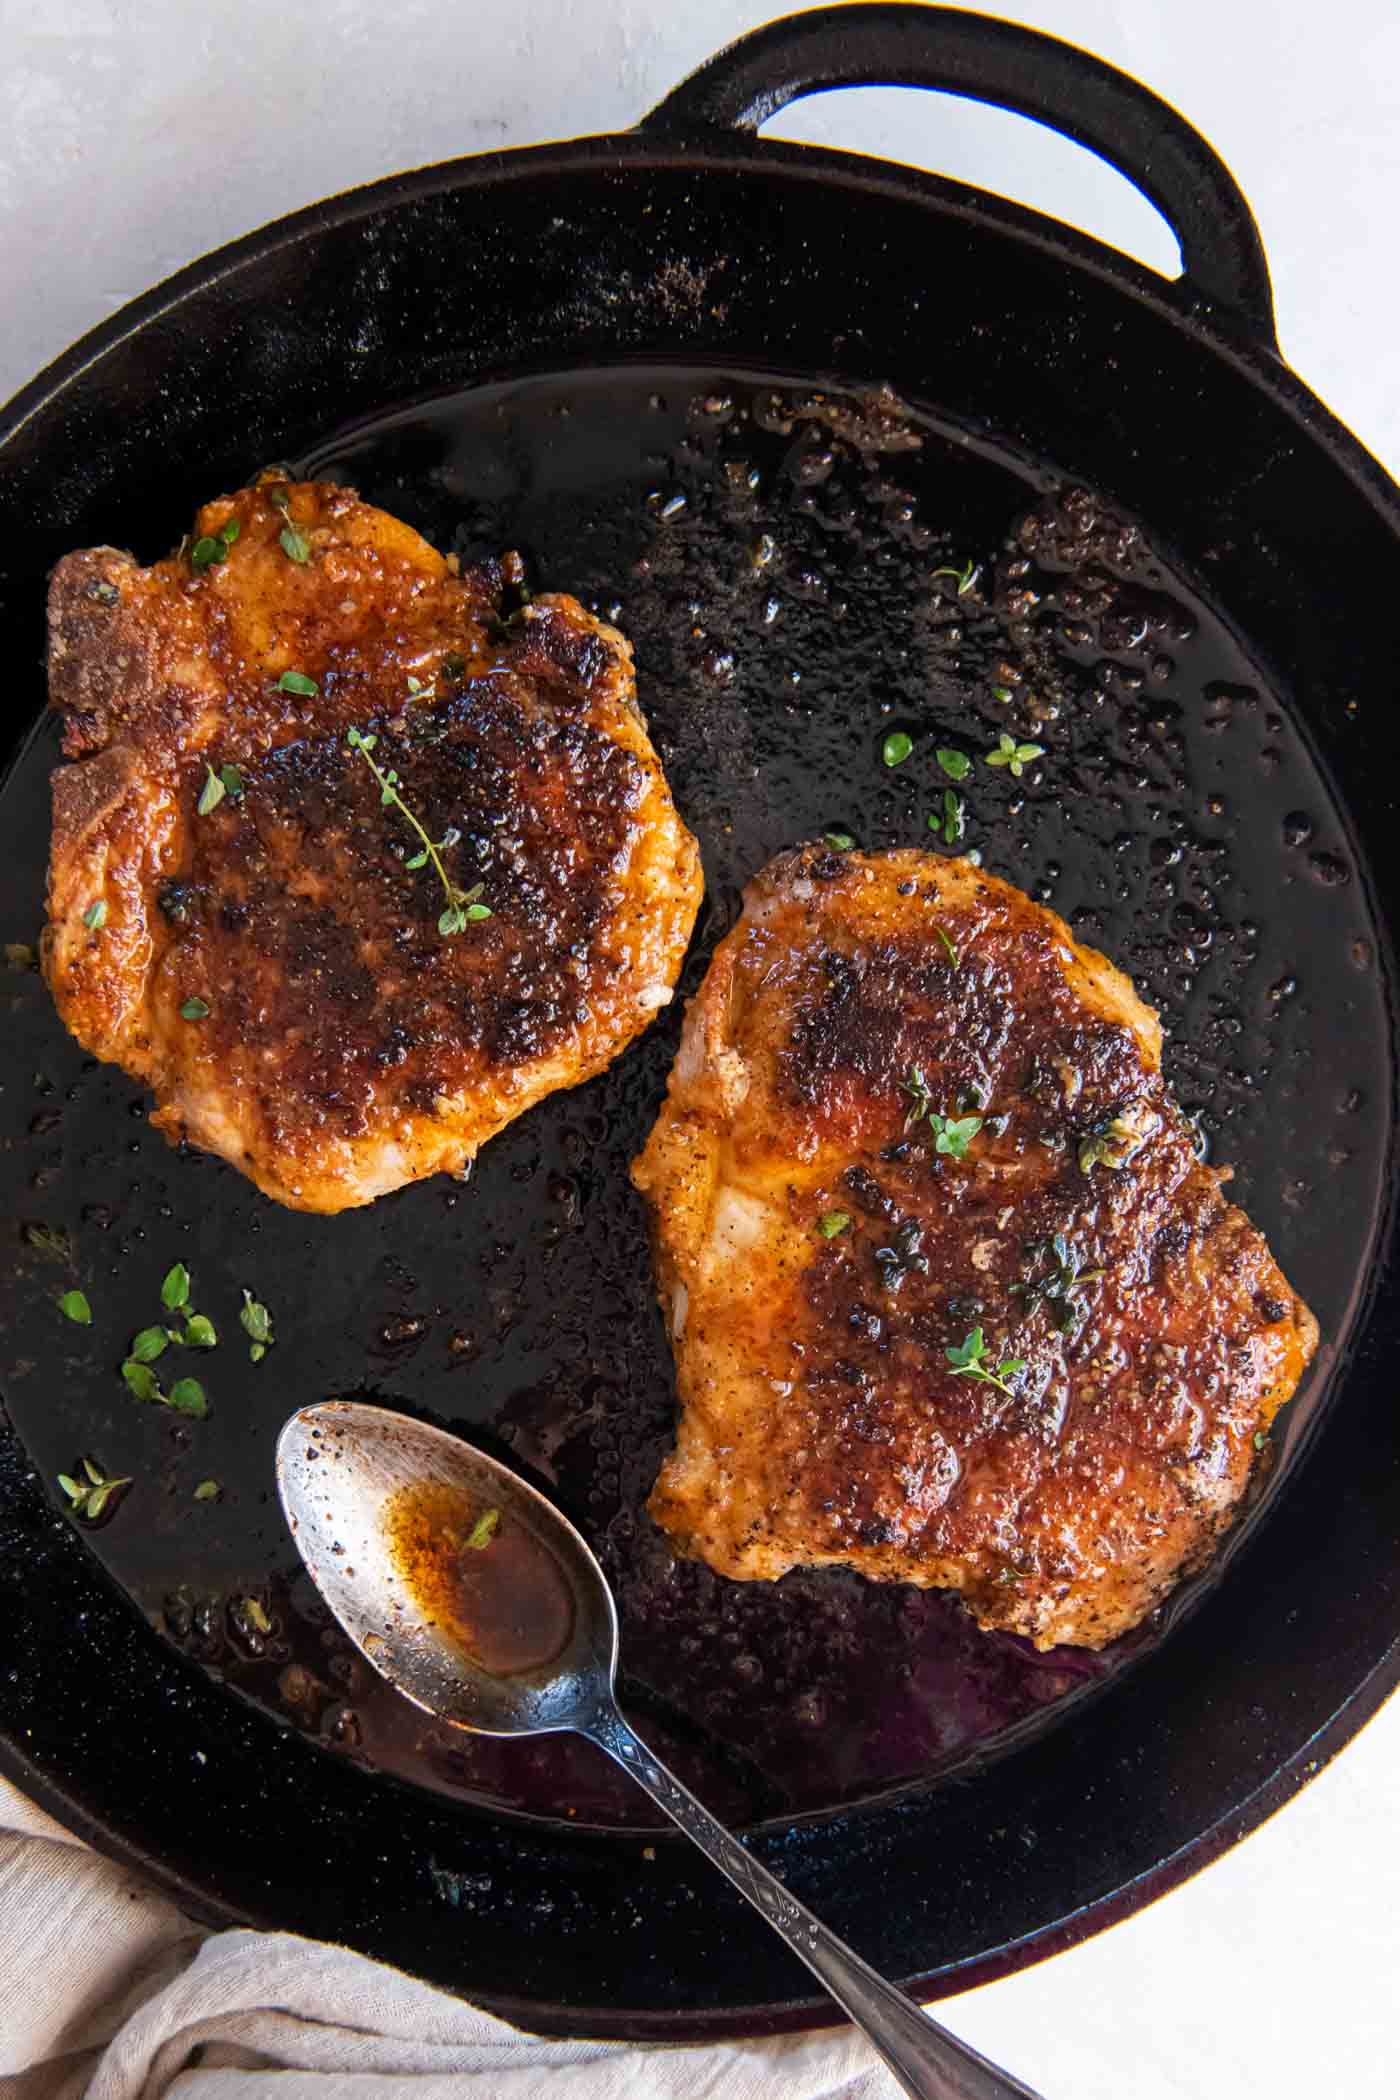 Two pan fried pork chops in a cast iron skillet with a spoon.